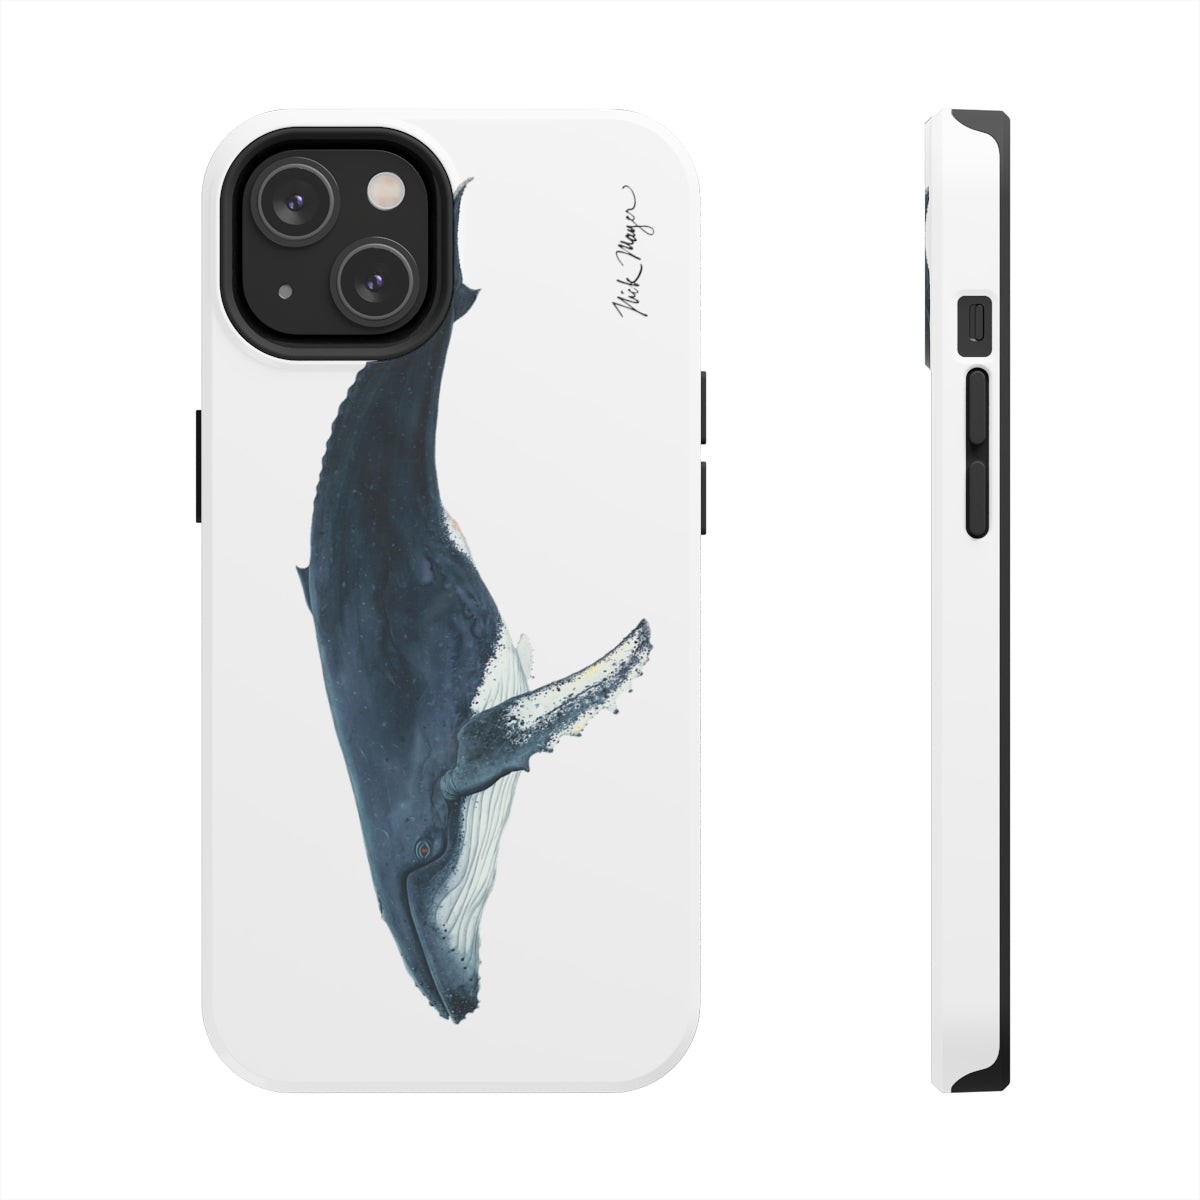 Humpback Whale iPhone Case - Durable and Lightweight Design